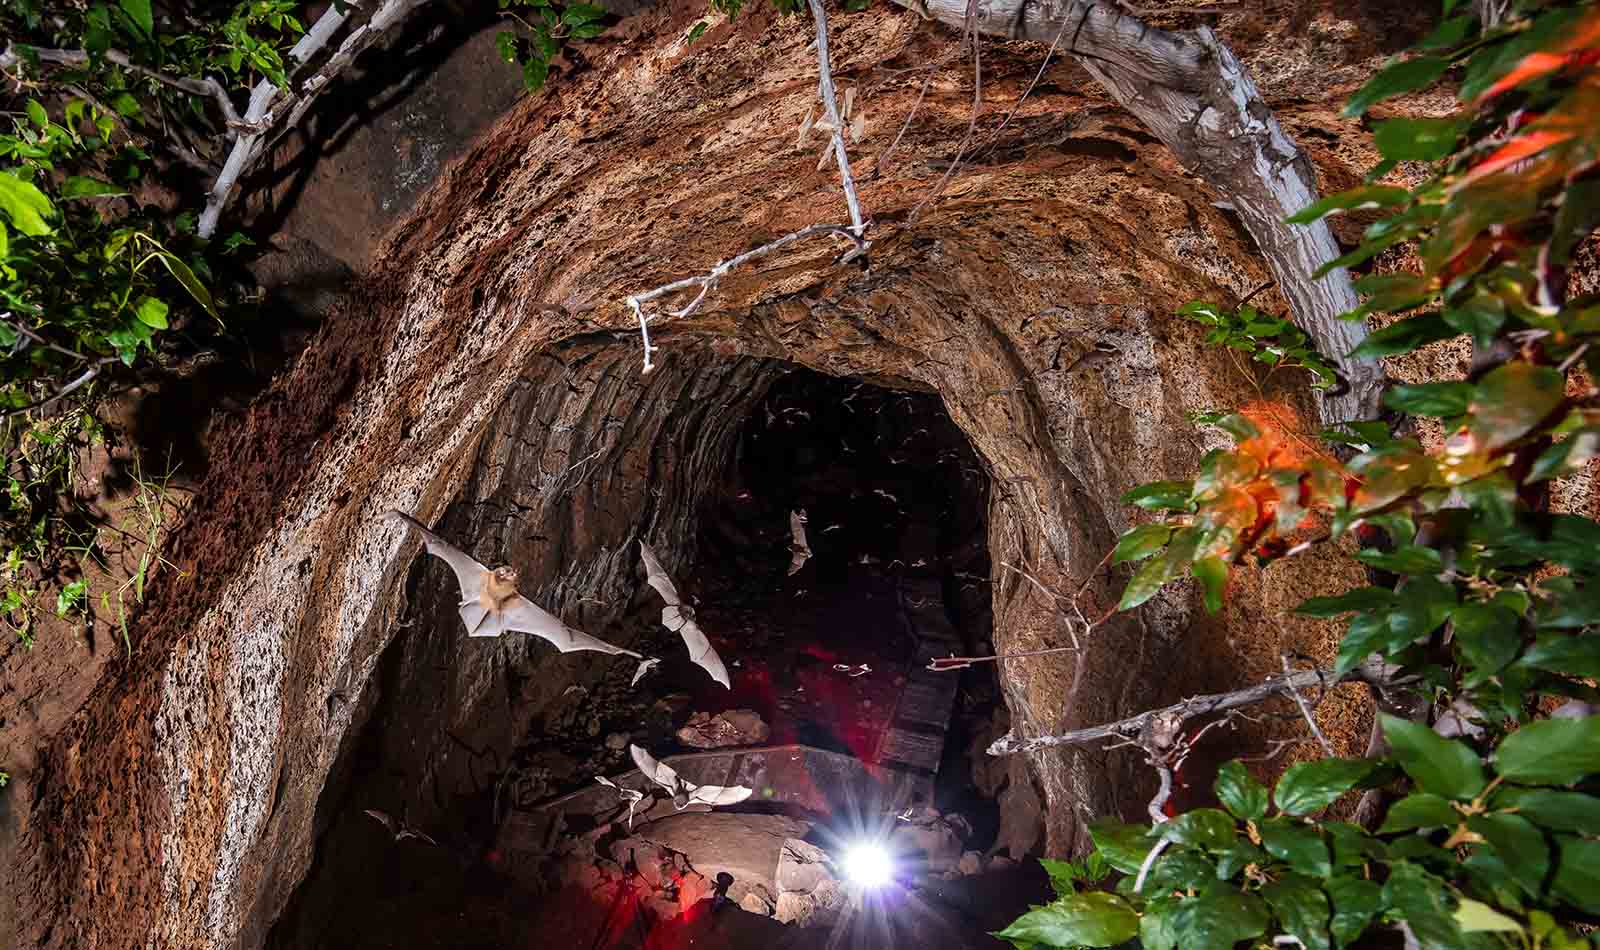 Bats emerge from the caves at dusk at Undara Experience | Queensland's volcanic history uncovered